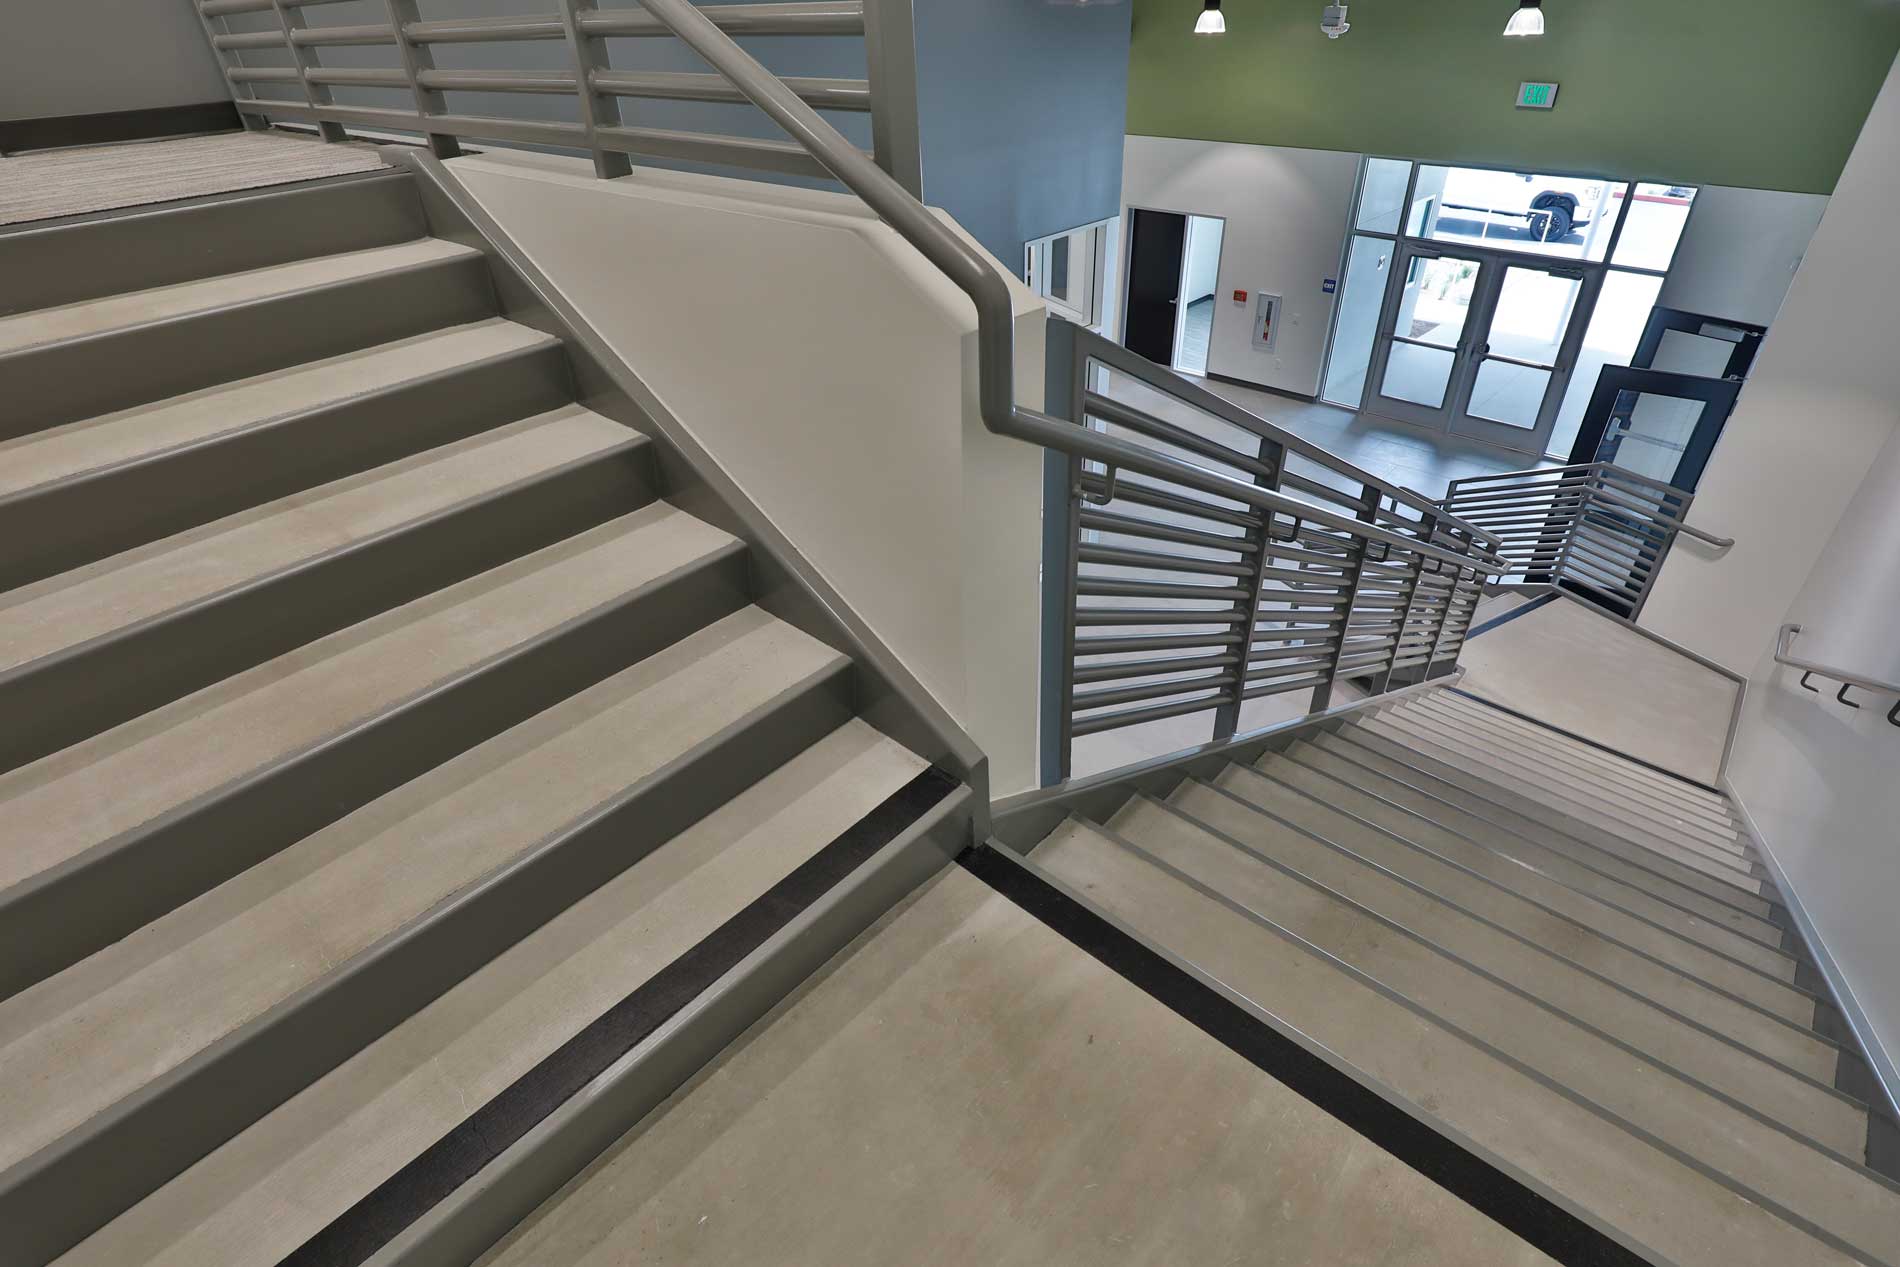 View looking down the stairs at Ontario Christian High School and student center